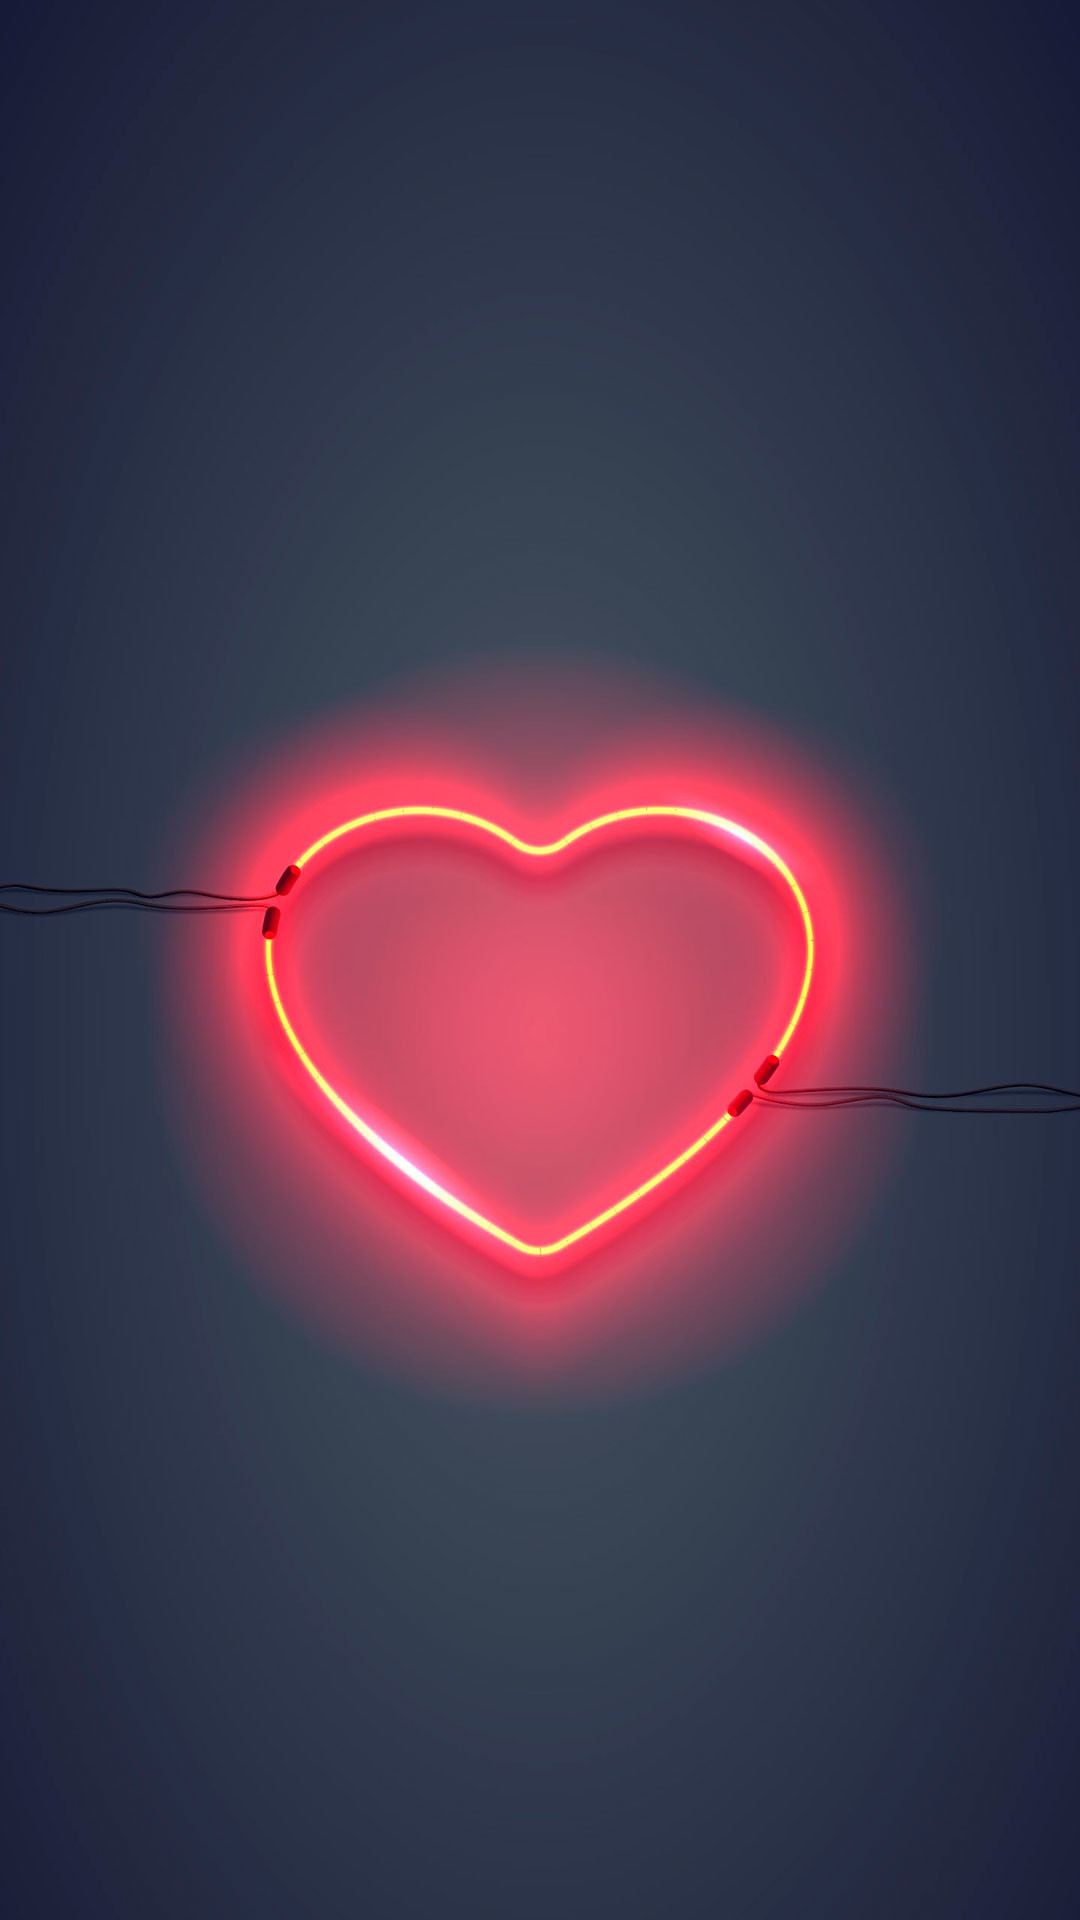 moving wallpapers for android,heart,red,love,light,organ